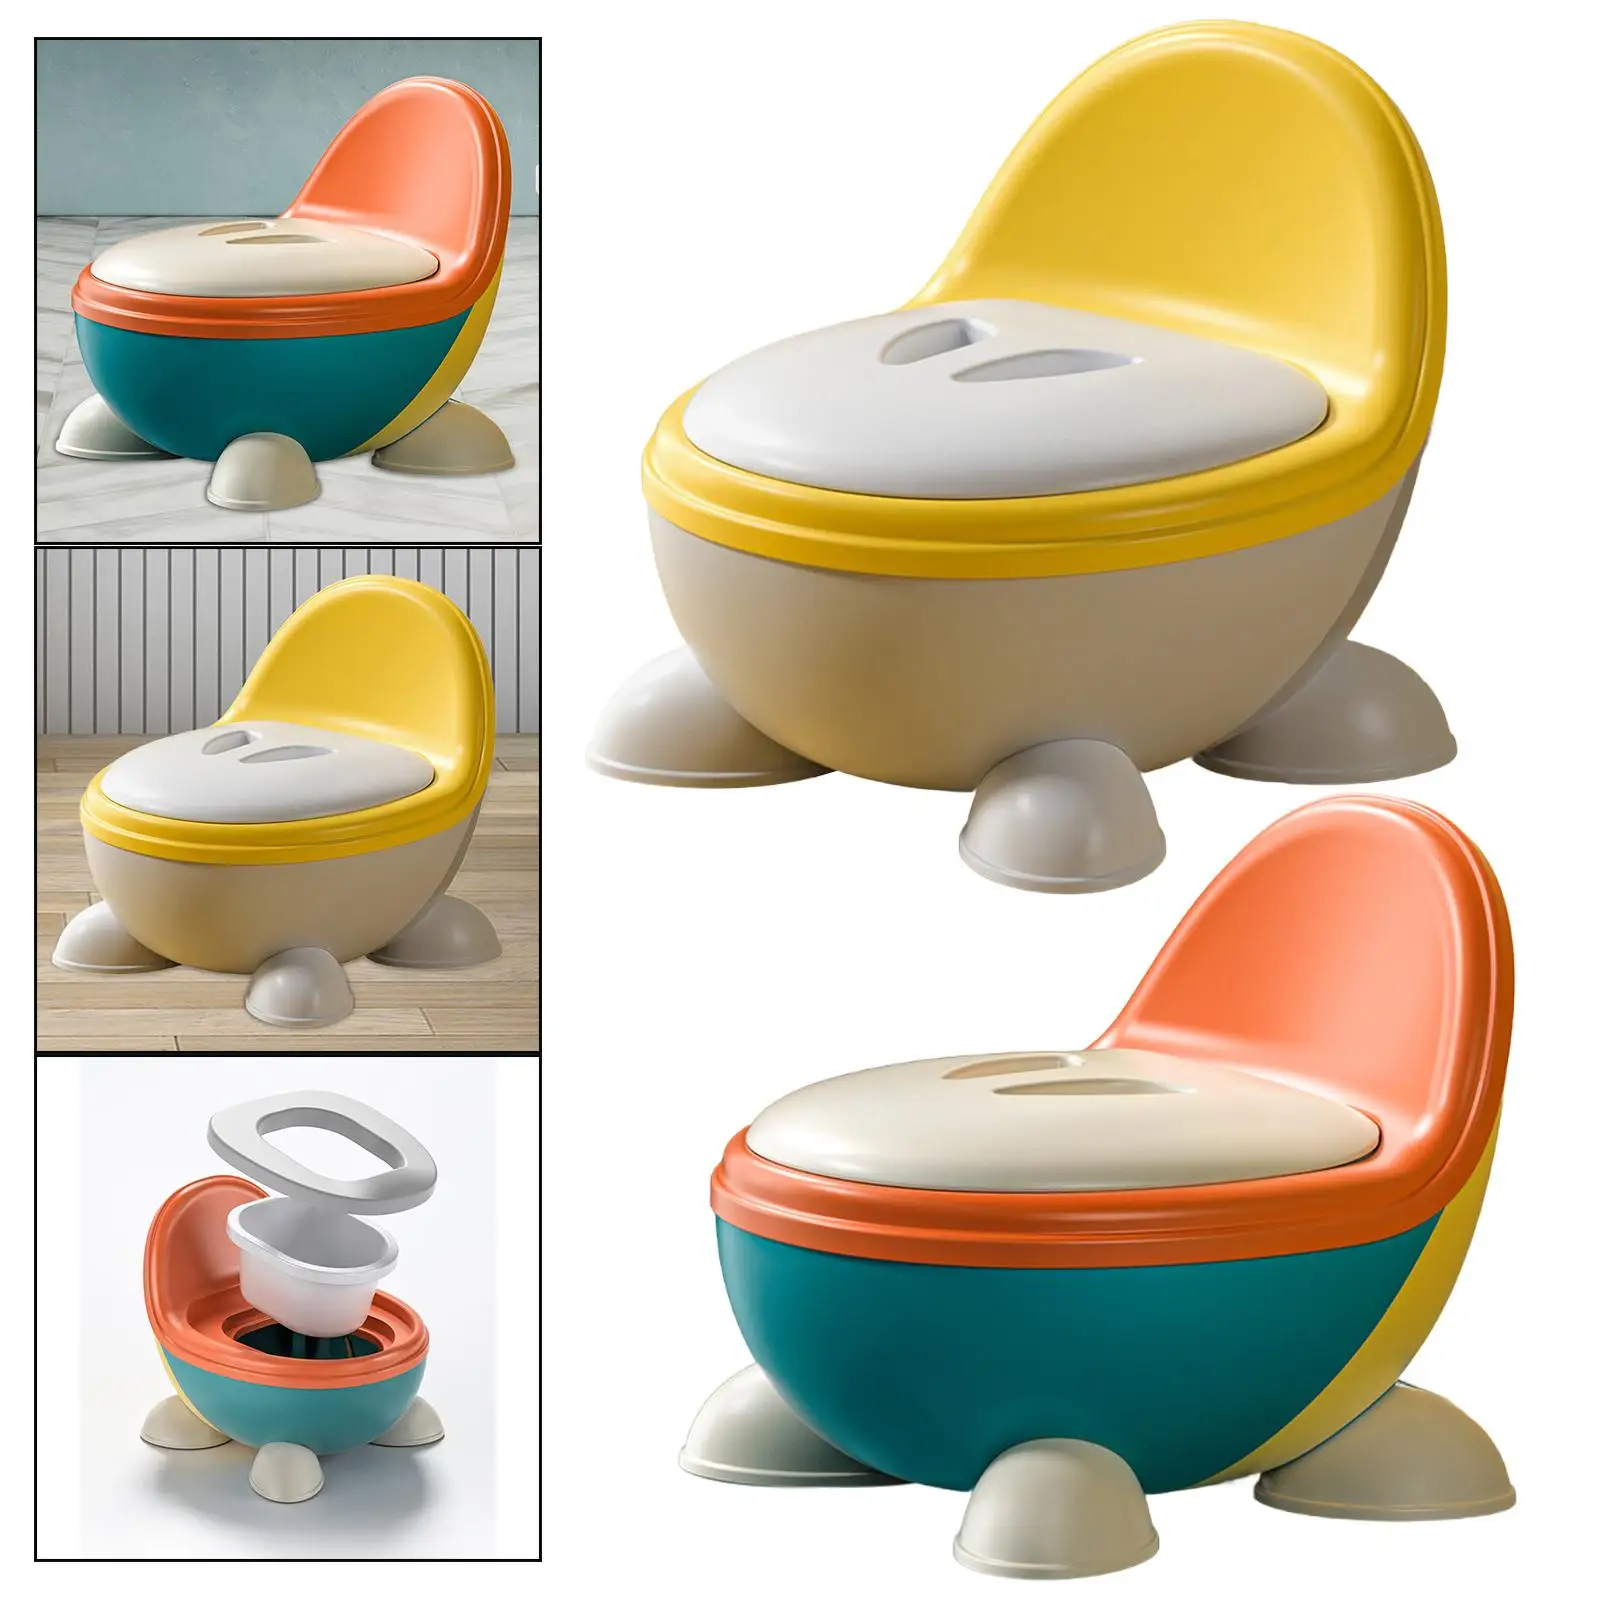 Potty Training Toilet Removable Potty Pot for Kids Boys Girls Ages 1-3 Years